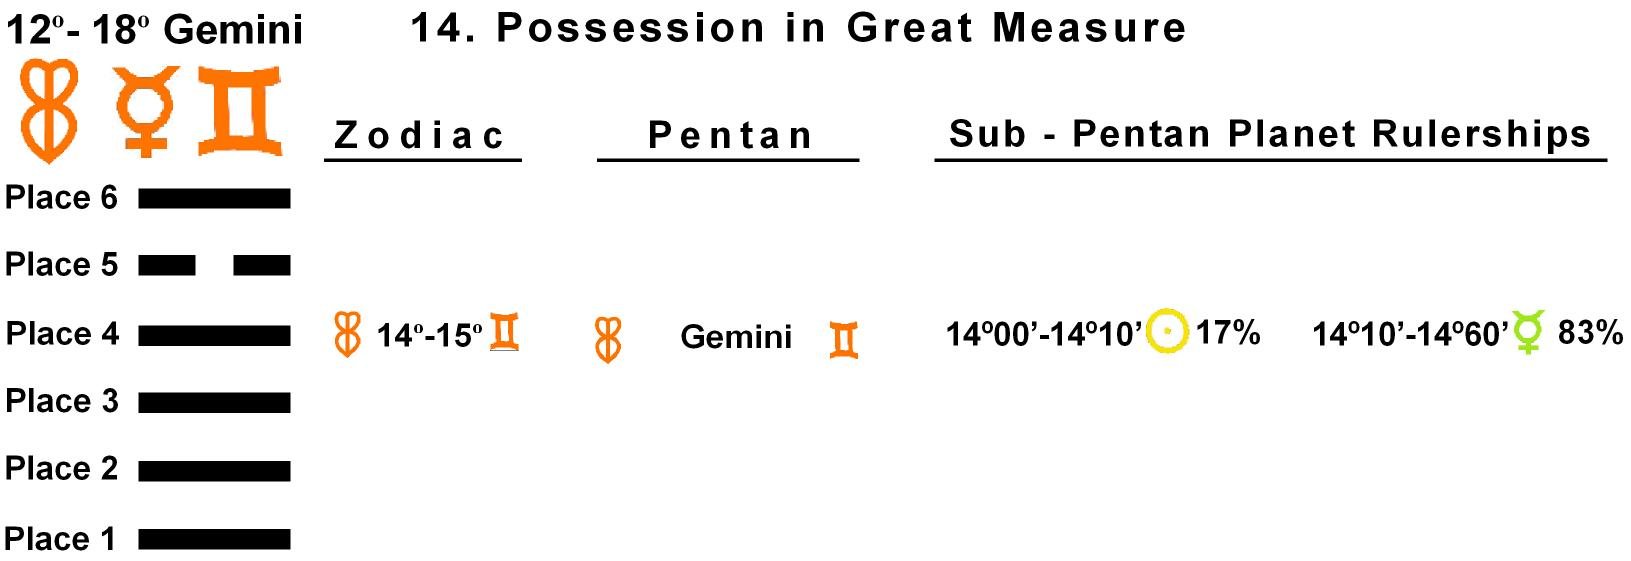 Pent-lines-03GE 14-15 Hx-14 Possession In Great Measure